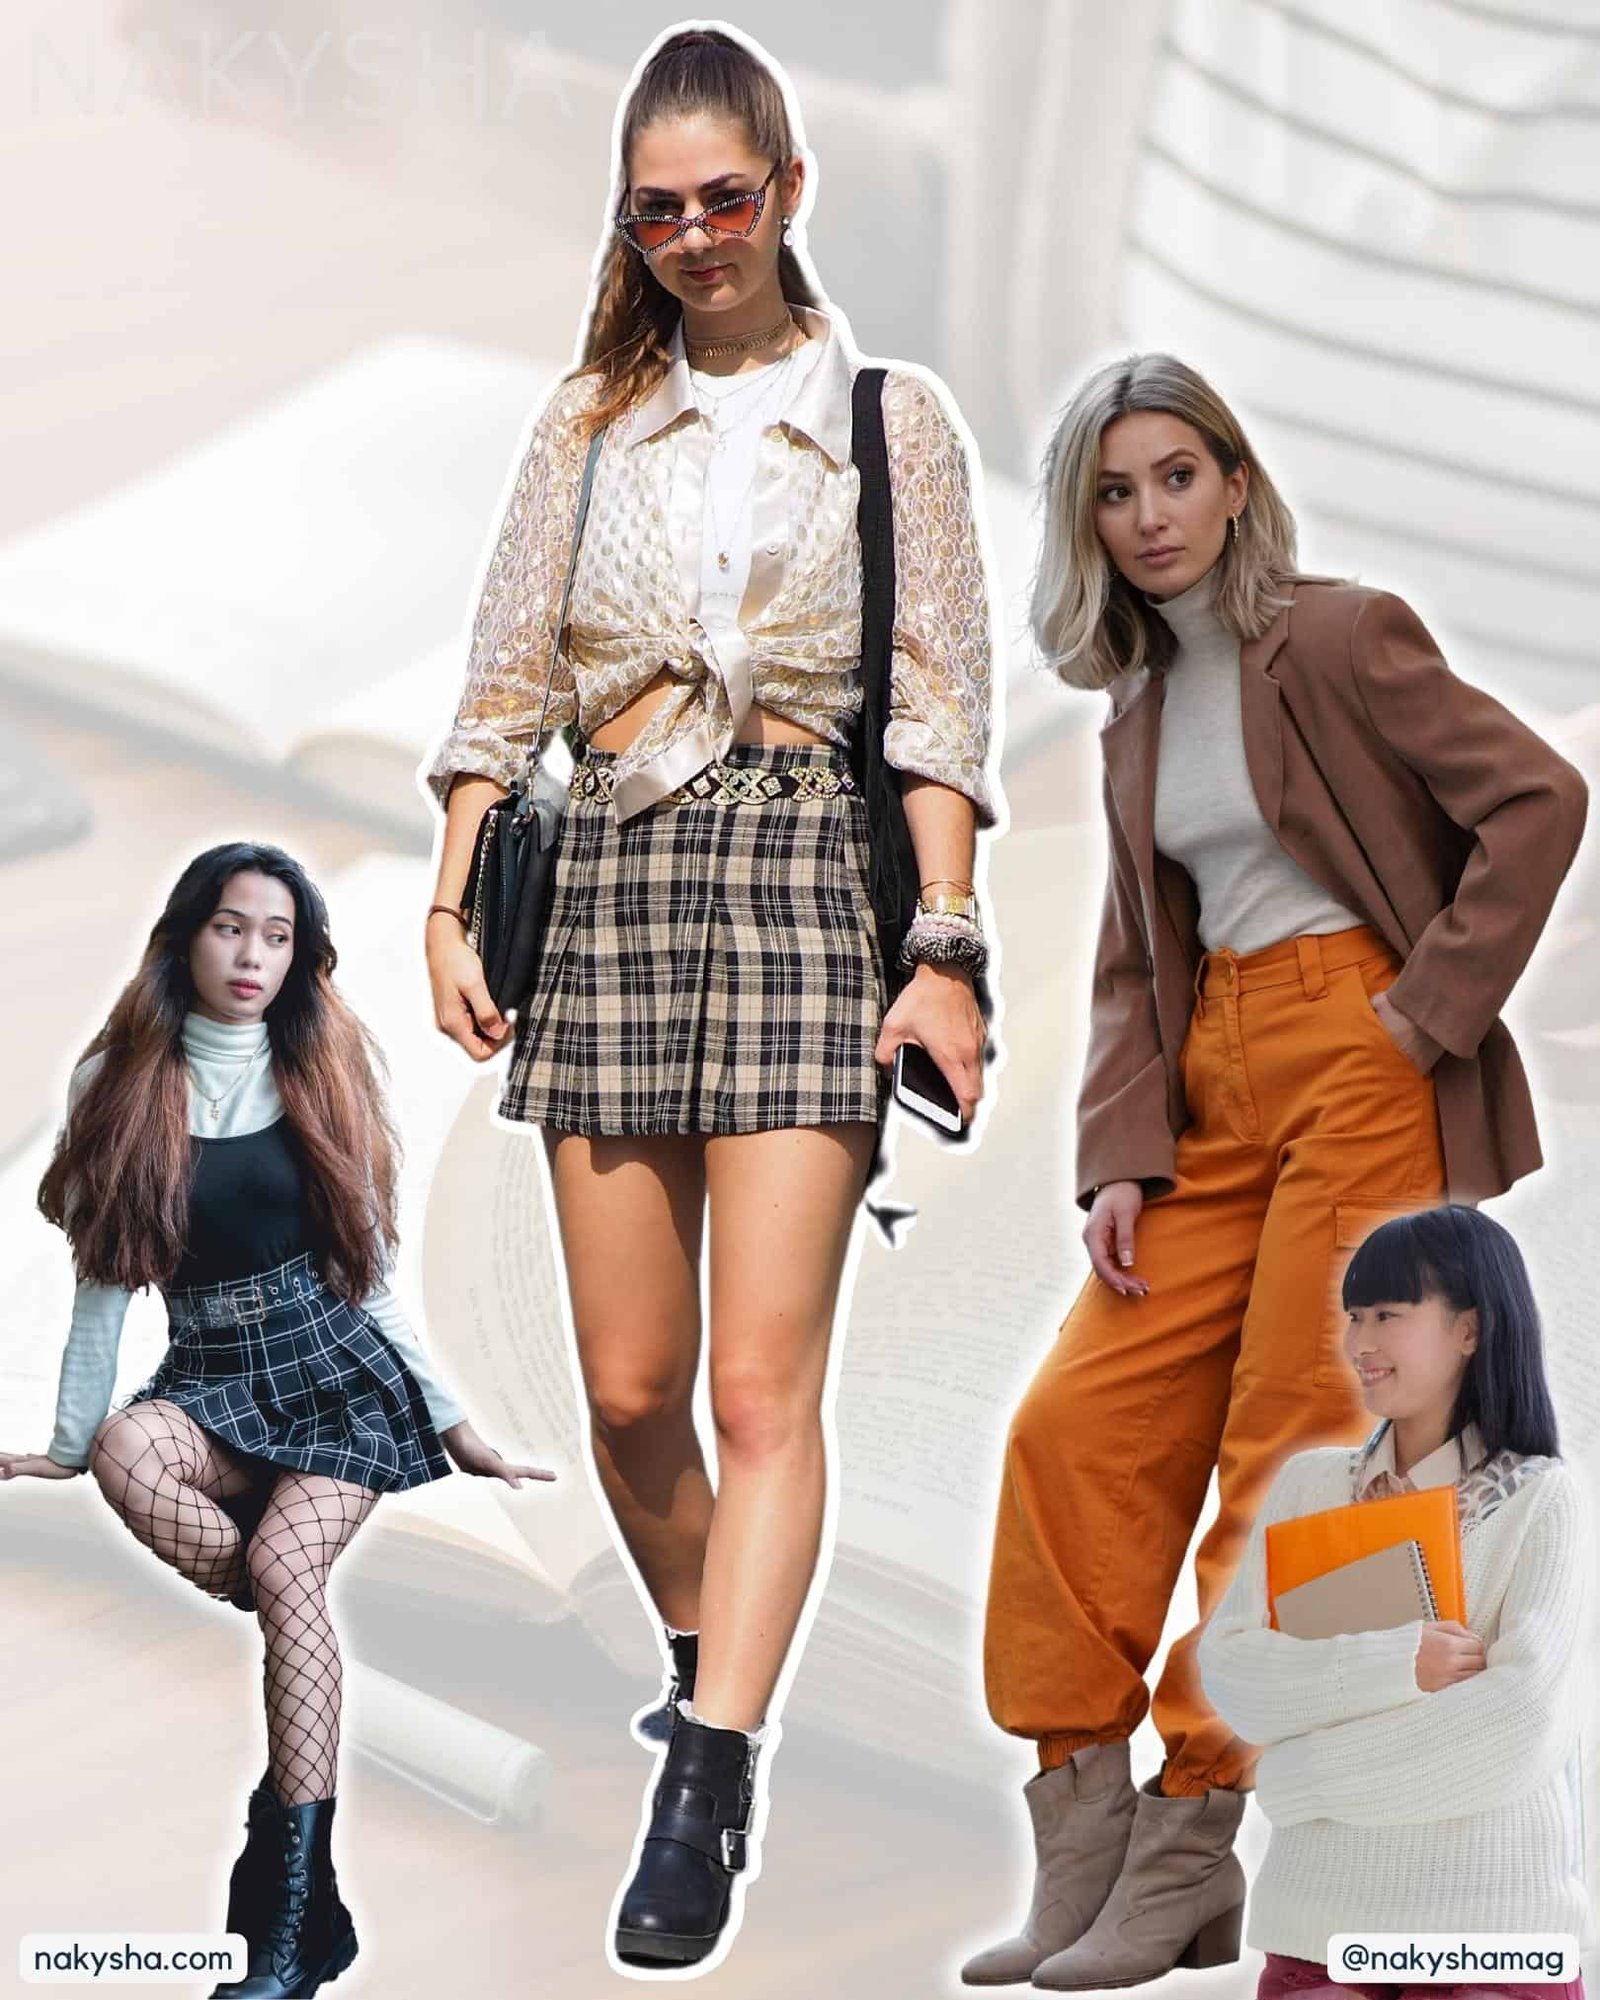 The Definitive Academia Fashion Guide and Outfit Ideas